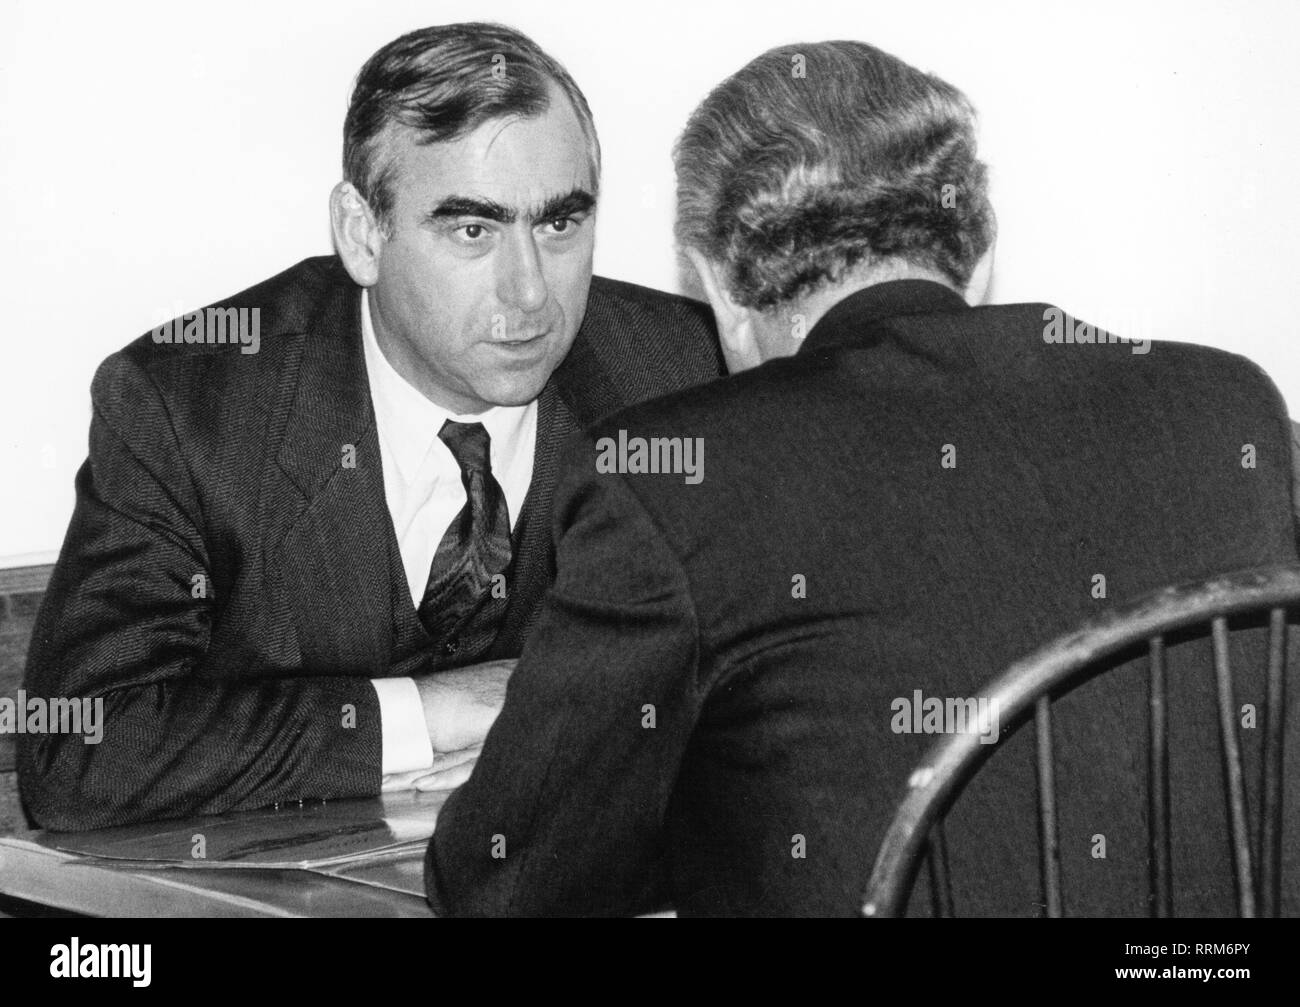 Waigel, "Theo", * 22.4.1939, German politician (Christian Social Union), Christian Social Union chairman, conversation with Prime Minister Max Streibl, XXVI. international military science congress, Munich, 28.-29.1.1989, Additional-Rights-Clearance-Info-Not-Available Stock Photo